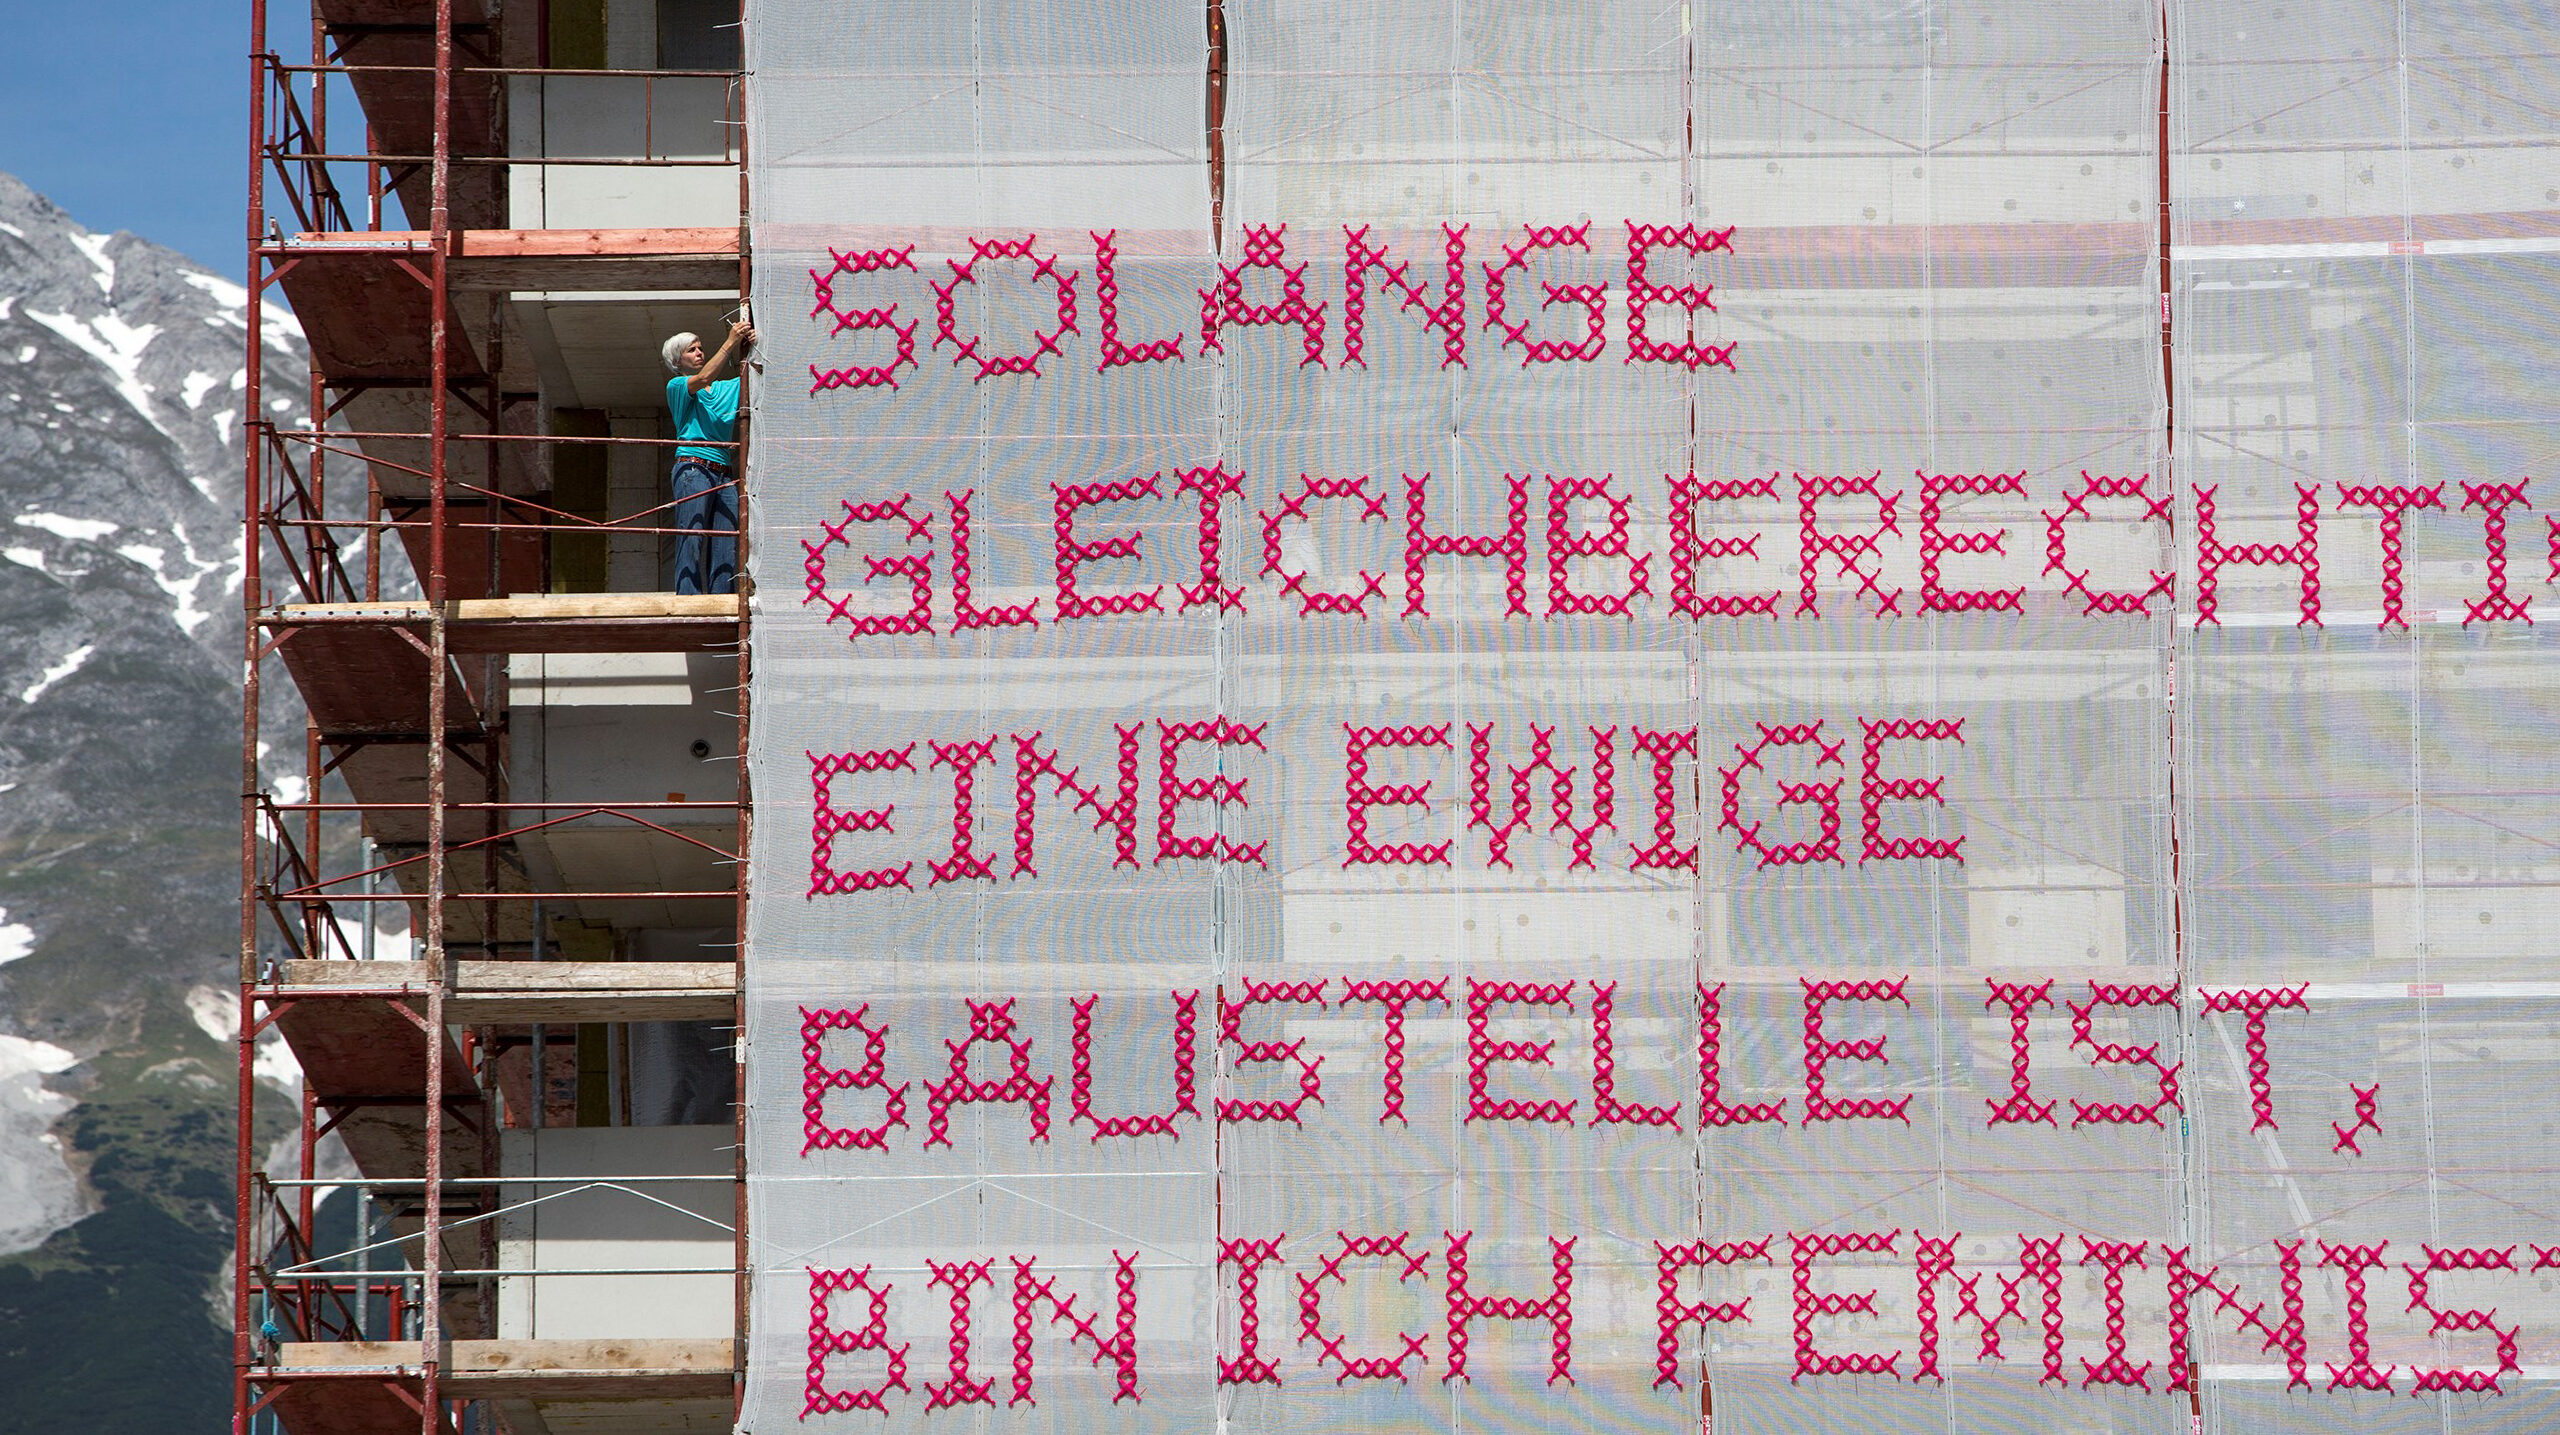 A light-skinned woman with short, platinum blonde hair stands on scaffolding attaching a very large panel of white gauzy material with “Solange Gleichberechtigung eine ewige Baustelle ist, bin ich Feministin” stitched in bright pink lettering to the bars of the scaffold. In the background you can see a bight blue sky and snow capped mountain.